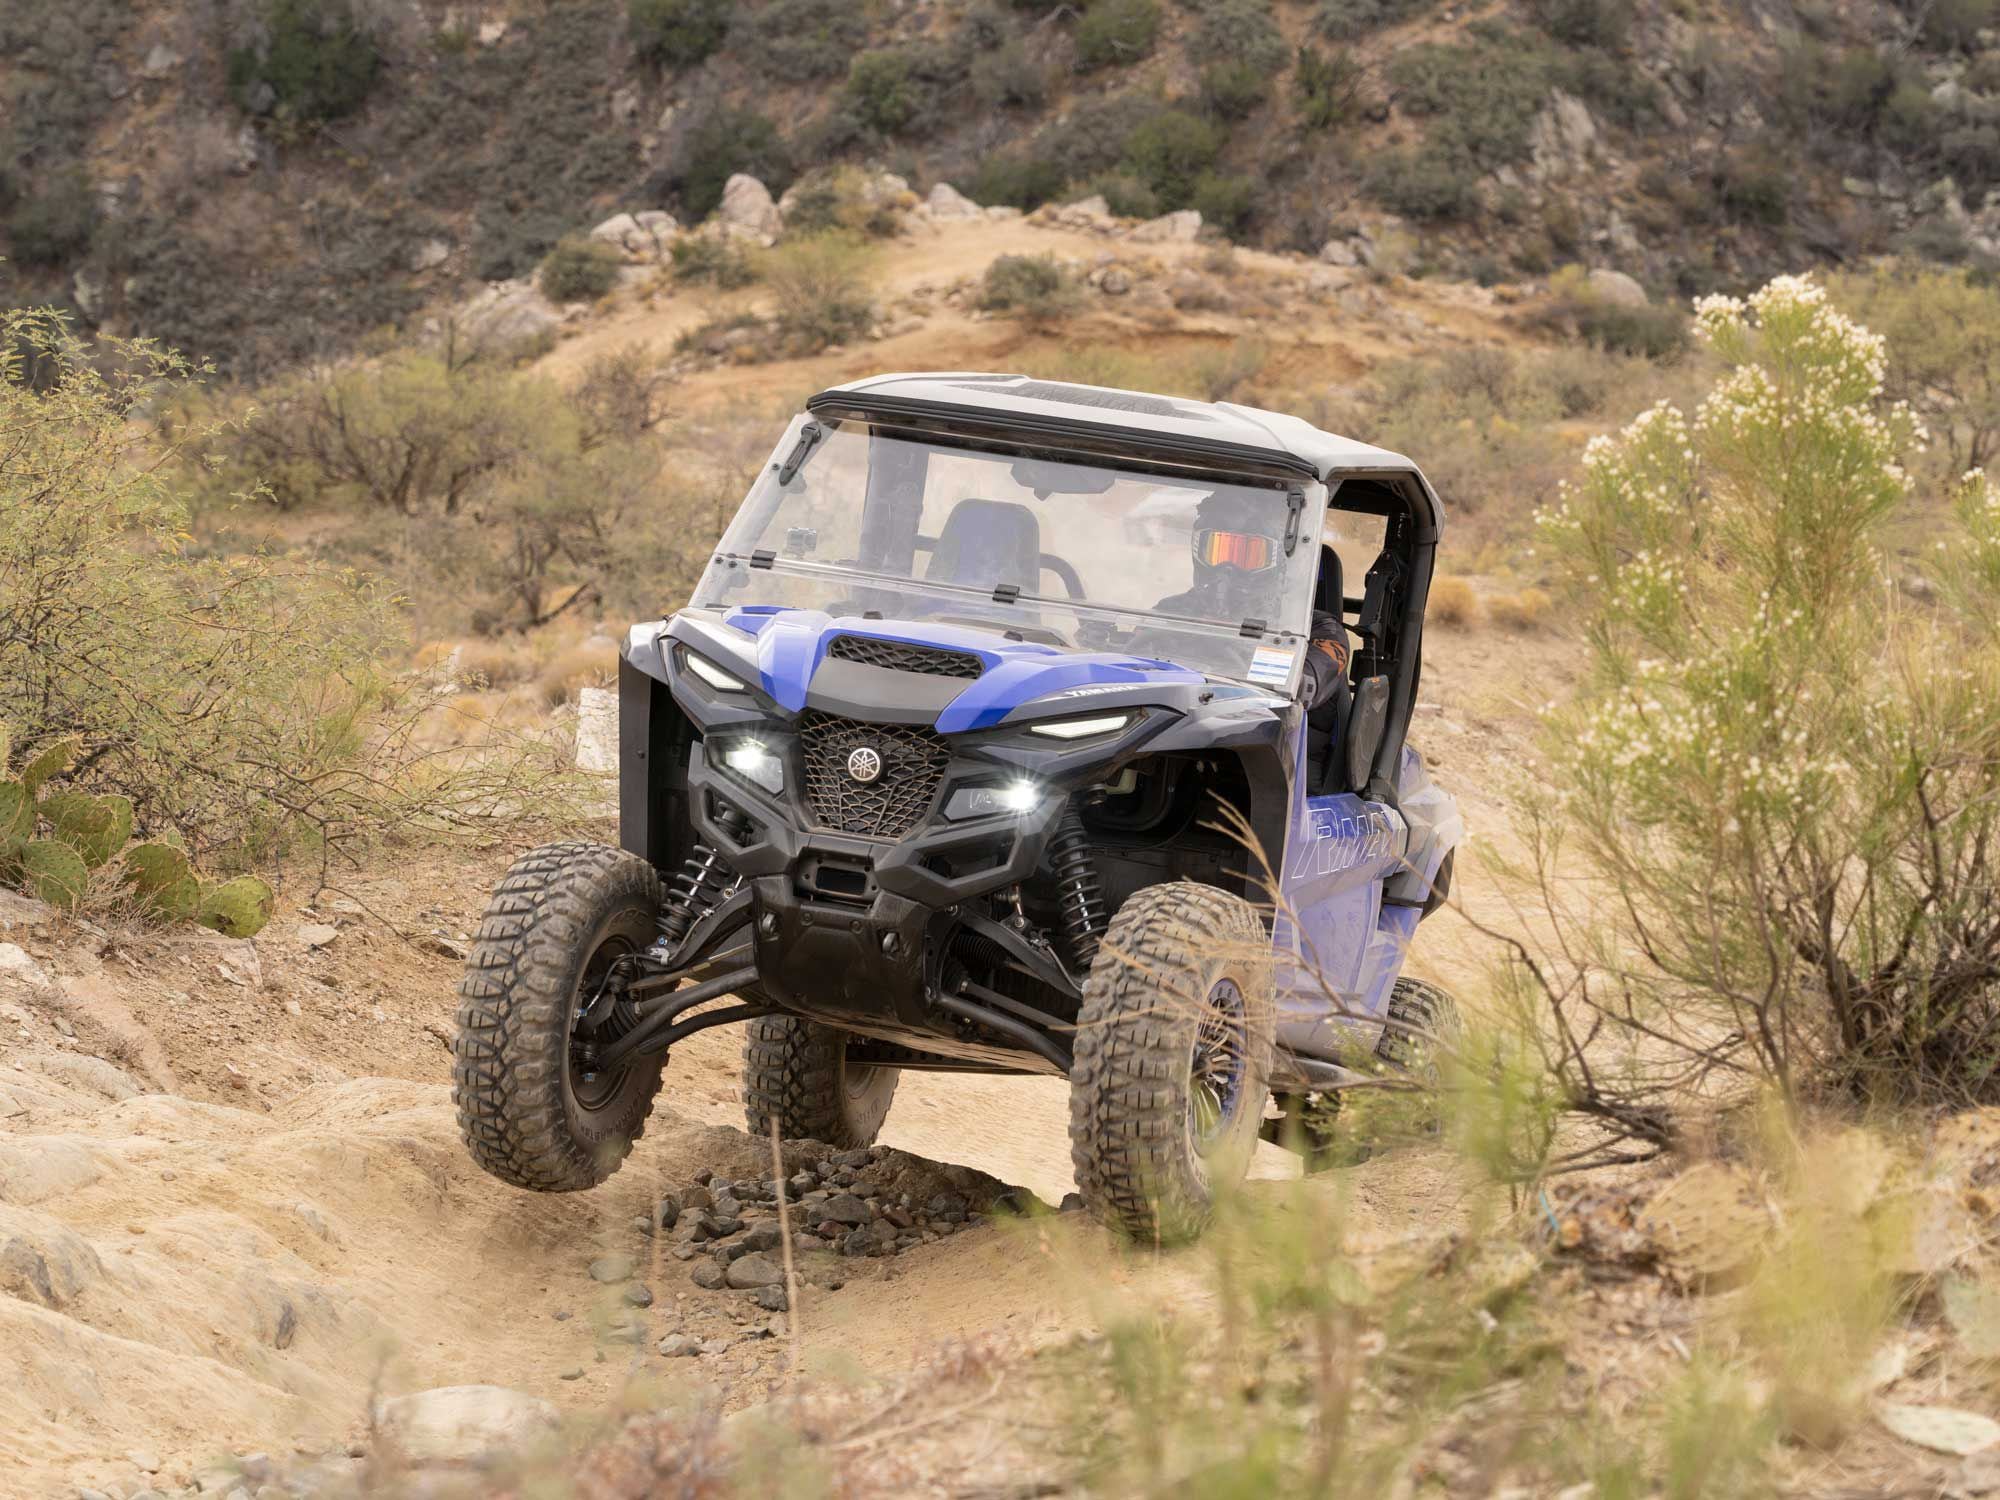 This recreational side-by-side packs pure-sport-level suspension travel.